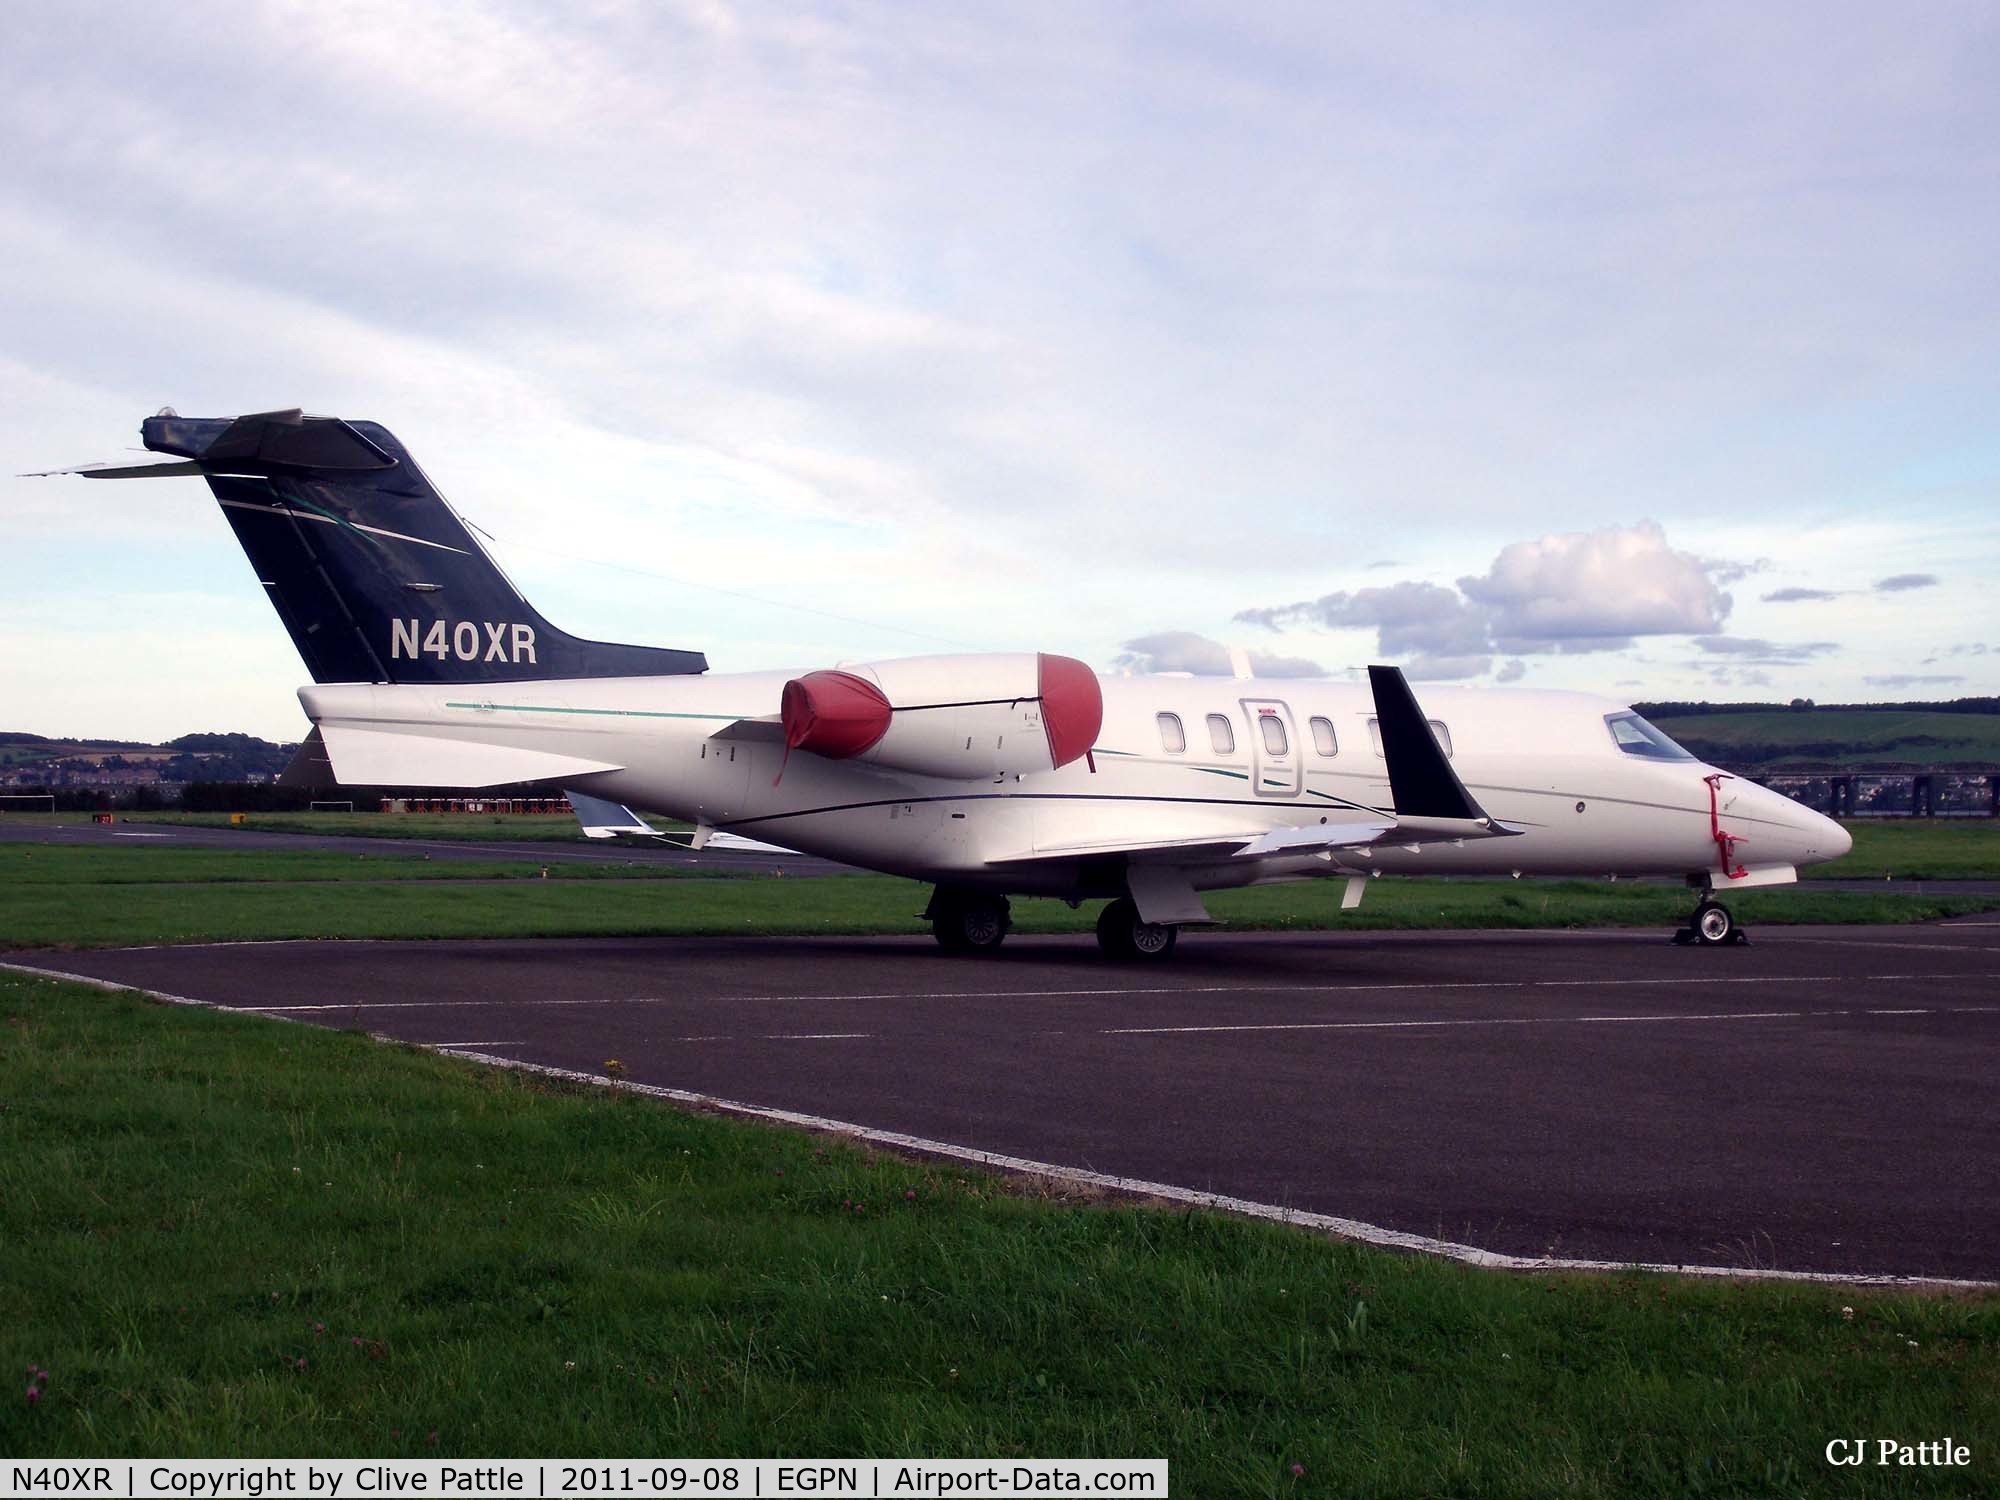 N40XR, 2005 Learjet 45 C/N 2028, On the ramp at Dundee EGPN, a frequent visitor.